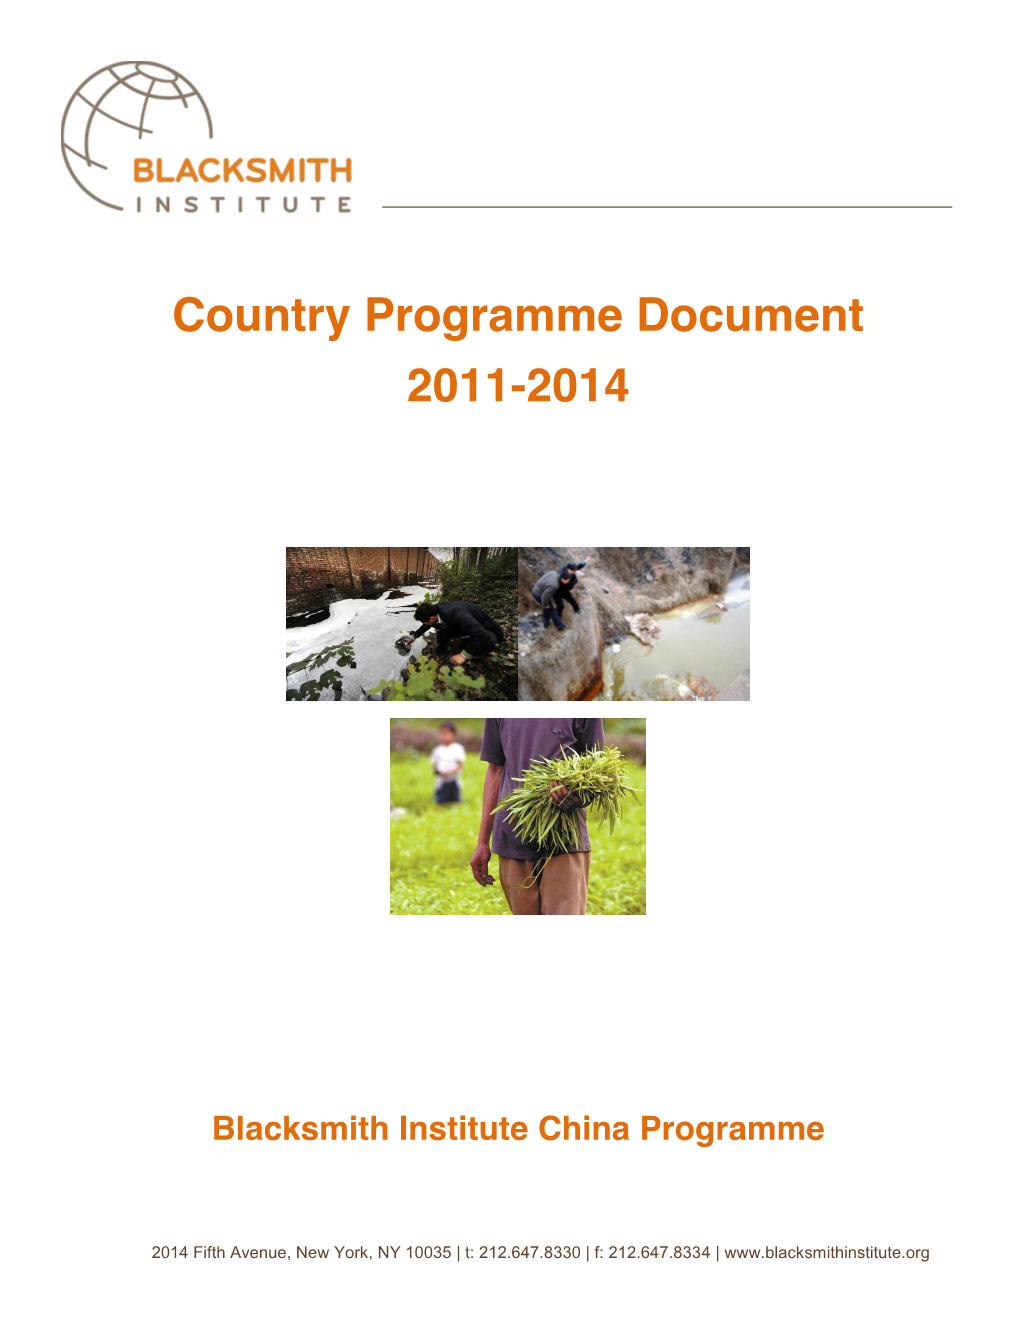 Country Programme Document 2011-2014